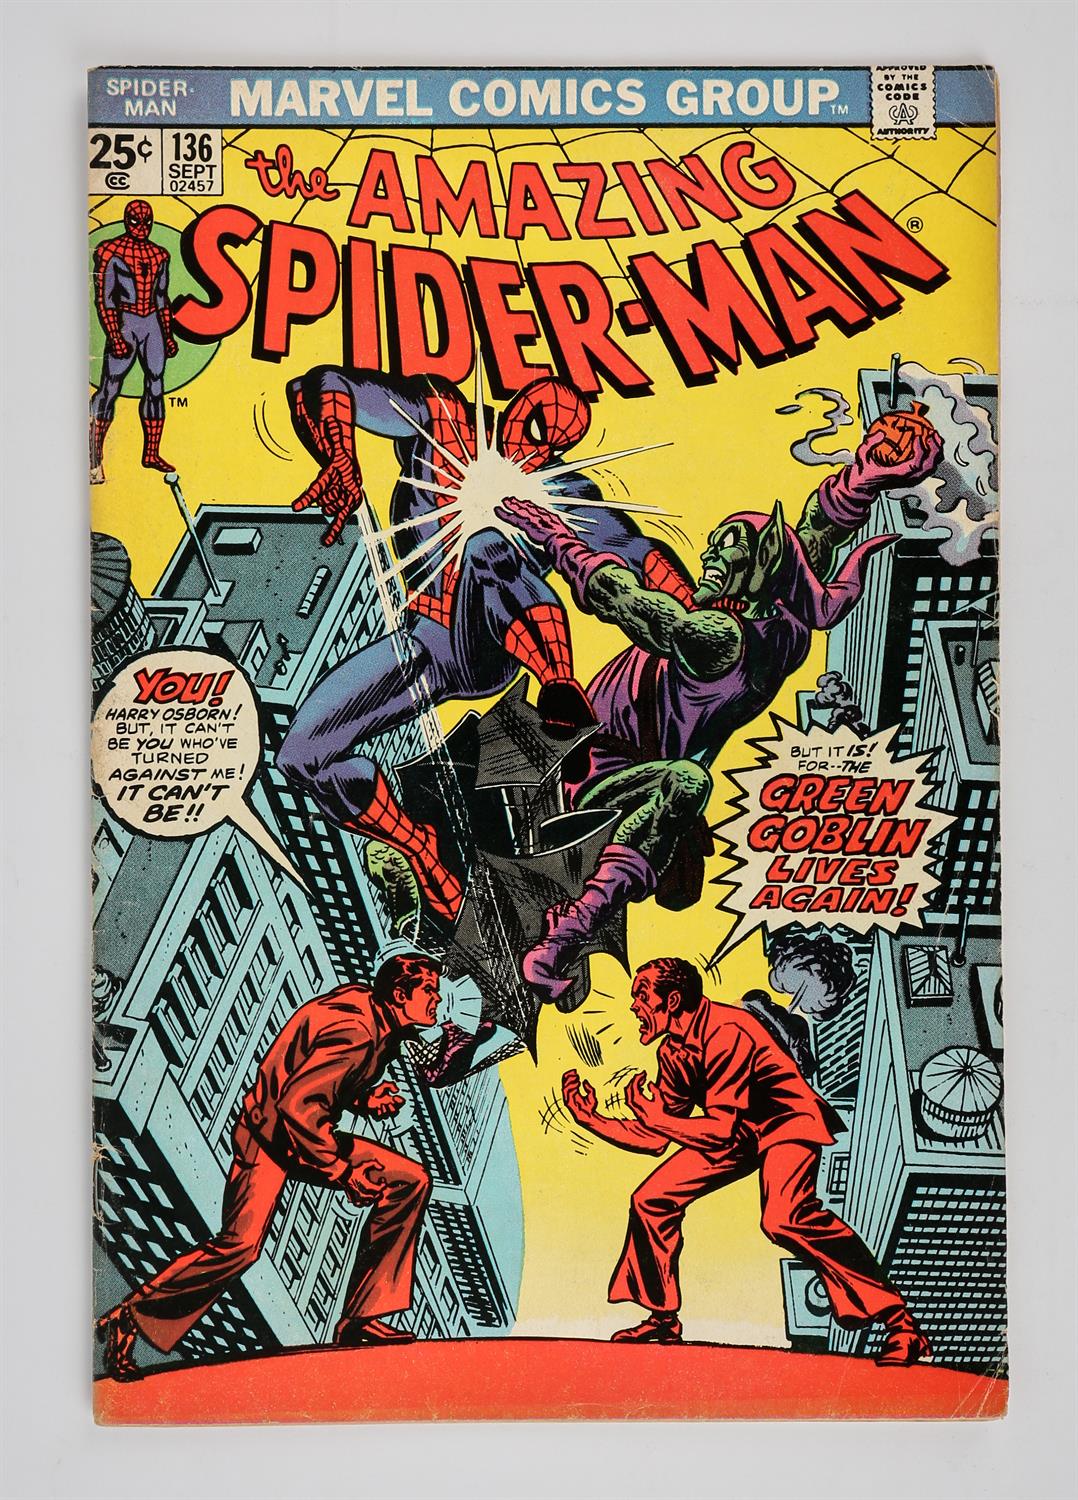 Marvel Comics: The Amazing Spider-Man No. 136 featuring the 1st appearance of Harry Osborne as the